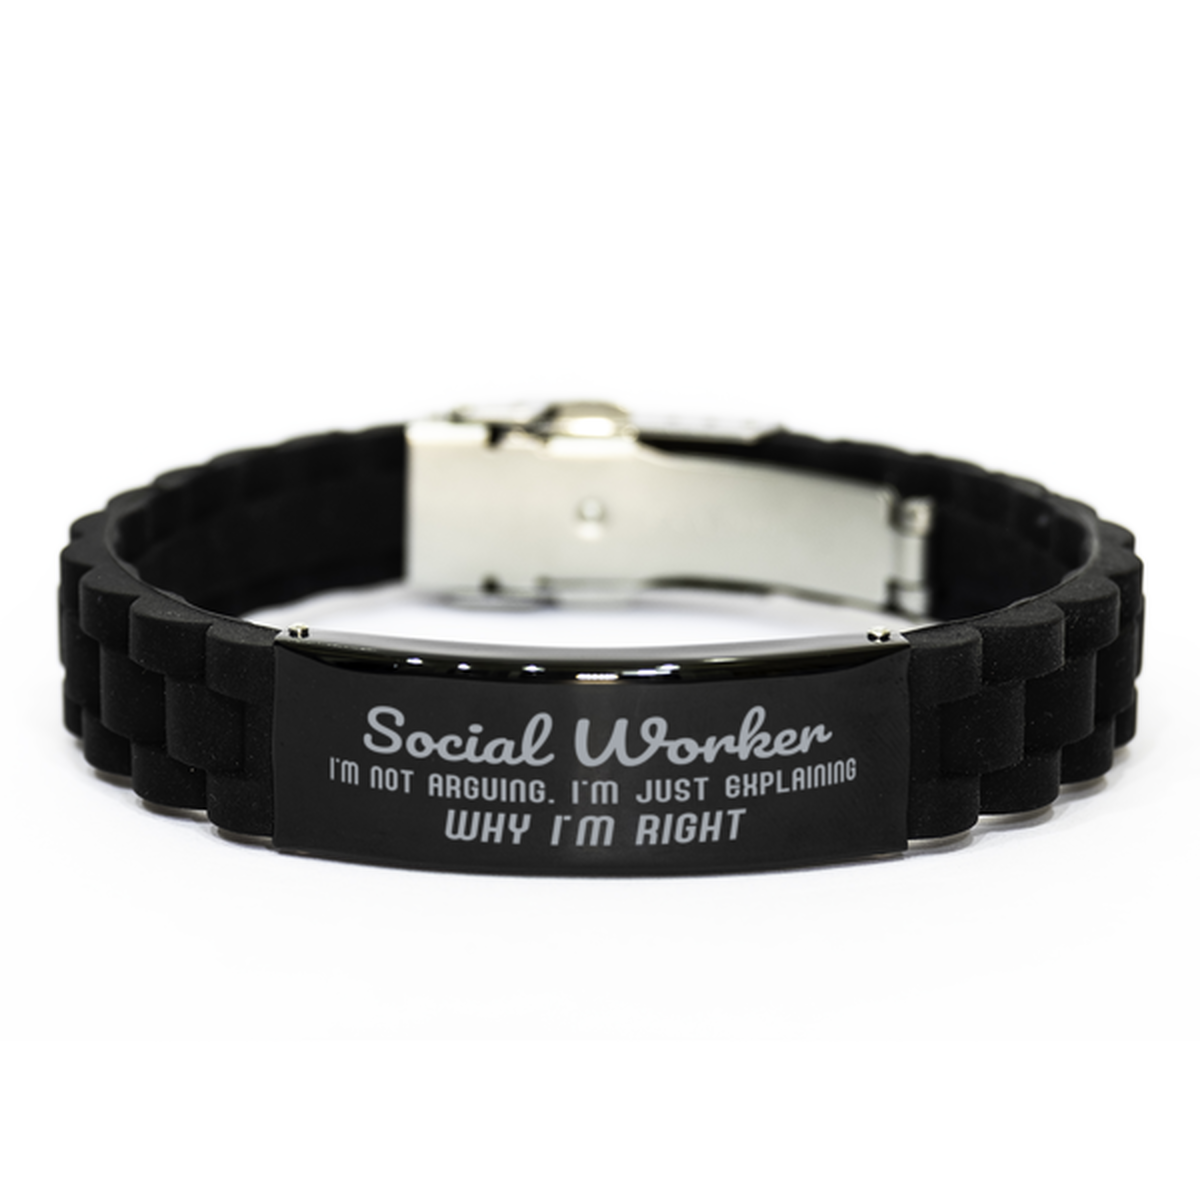 Social Worker I'm not Arguing. I'm Just Explaining Why I'm RIGHT Black Glidelock Clasp Bracelet, Funny Saying Quote Social Worker Gifts For Social Worker Graduation Birthday Christmas Gifts for Men Women Coworker